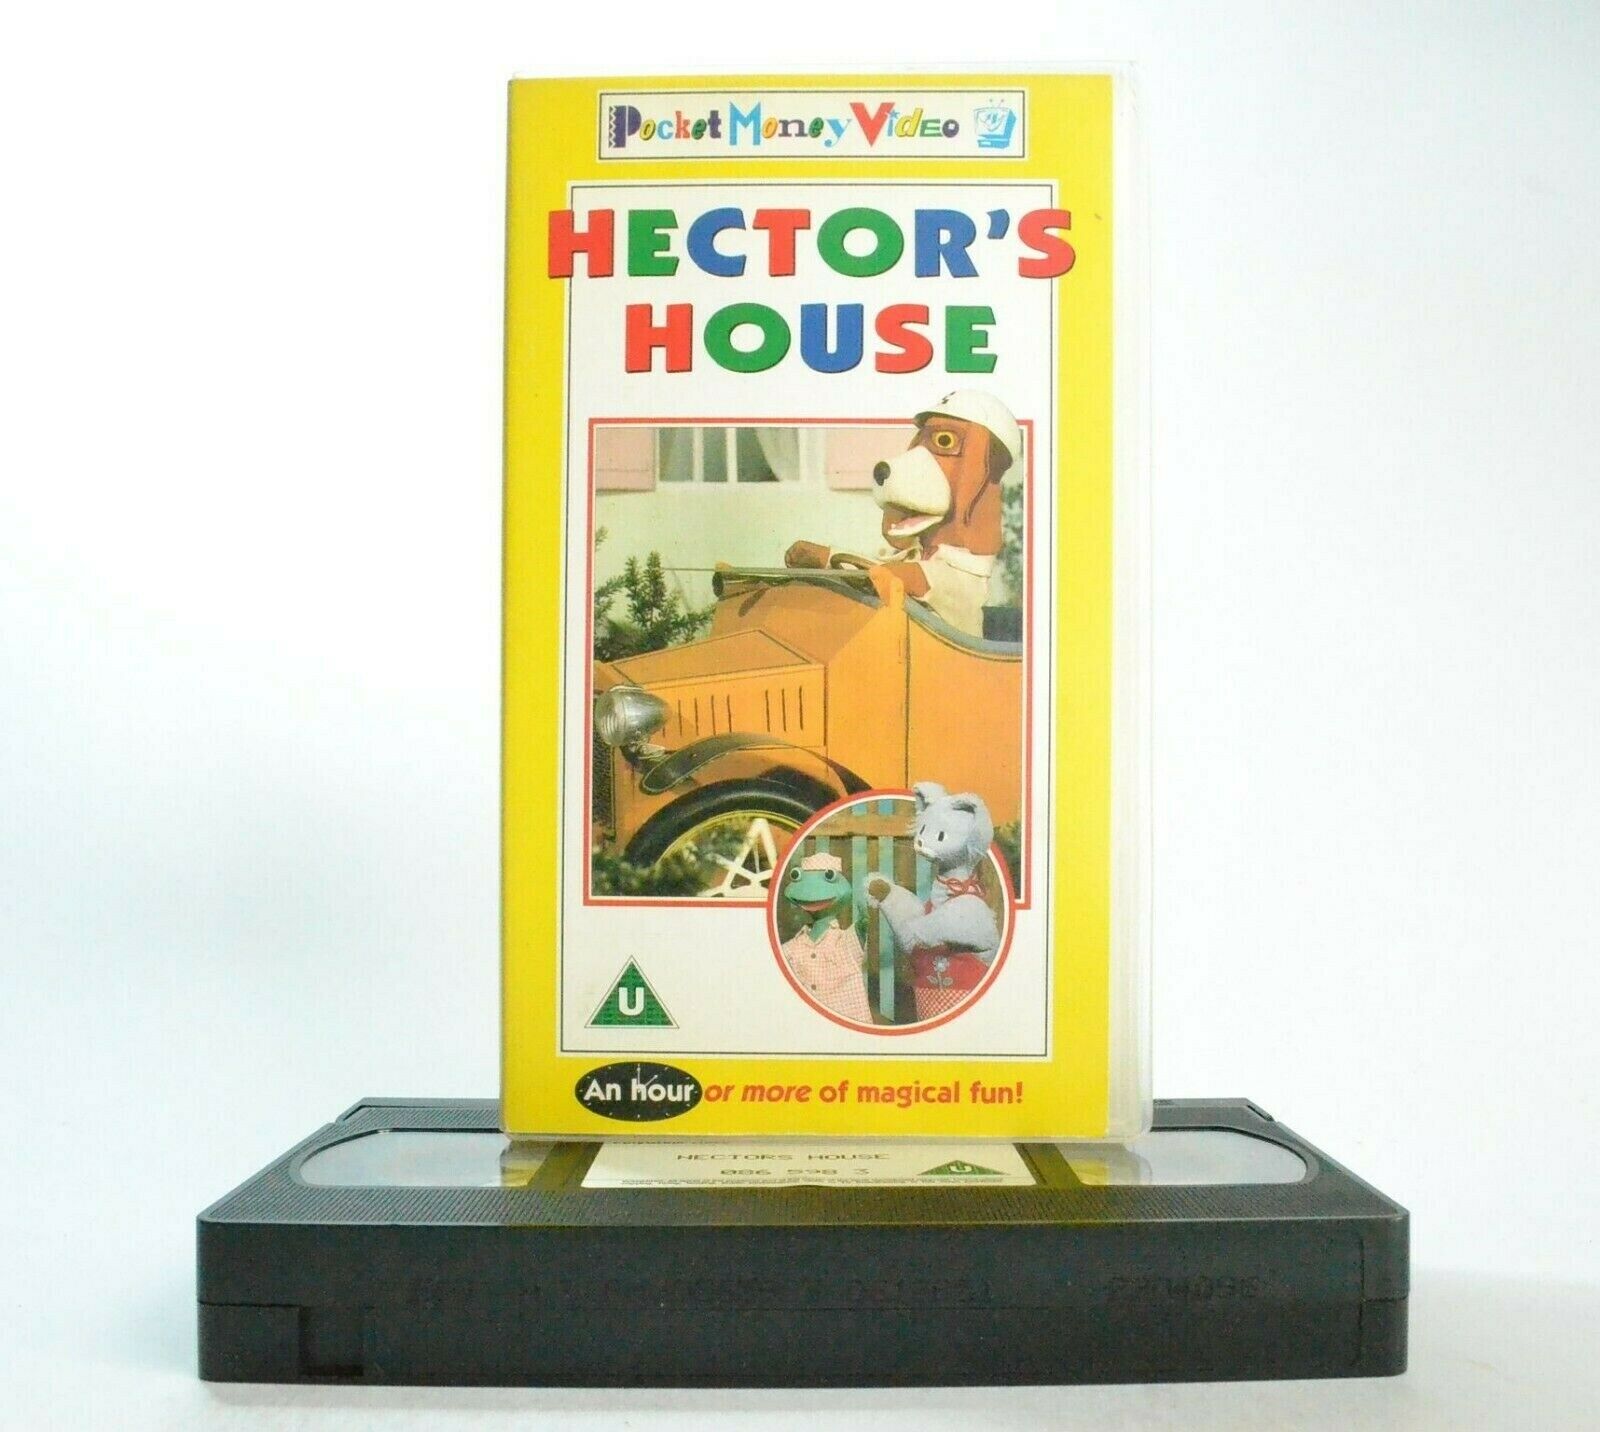 Hector's House: (1965) Europe 1 - Classic Children's Series - Educational - VHS-